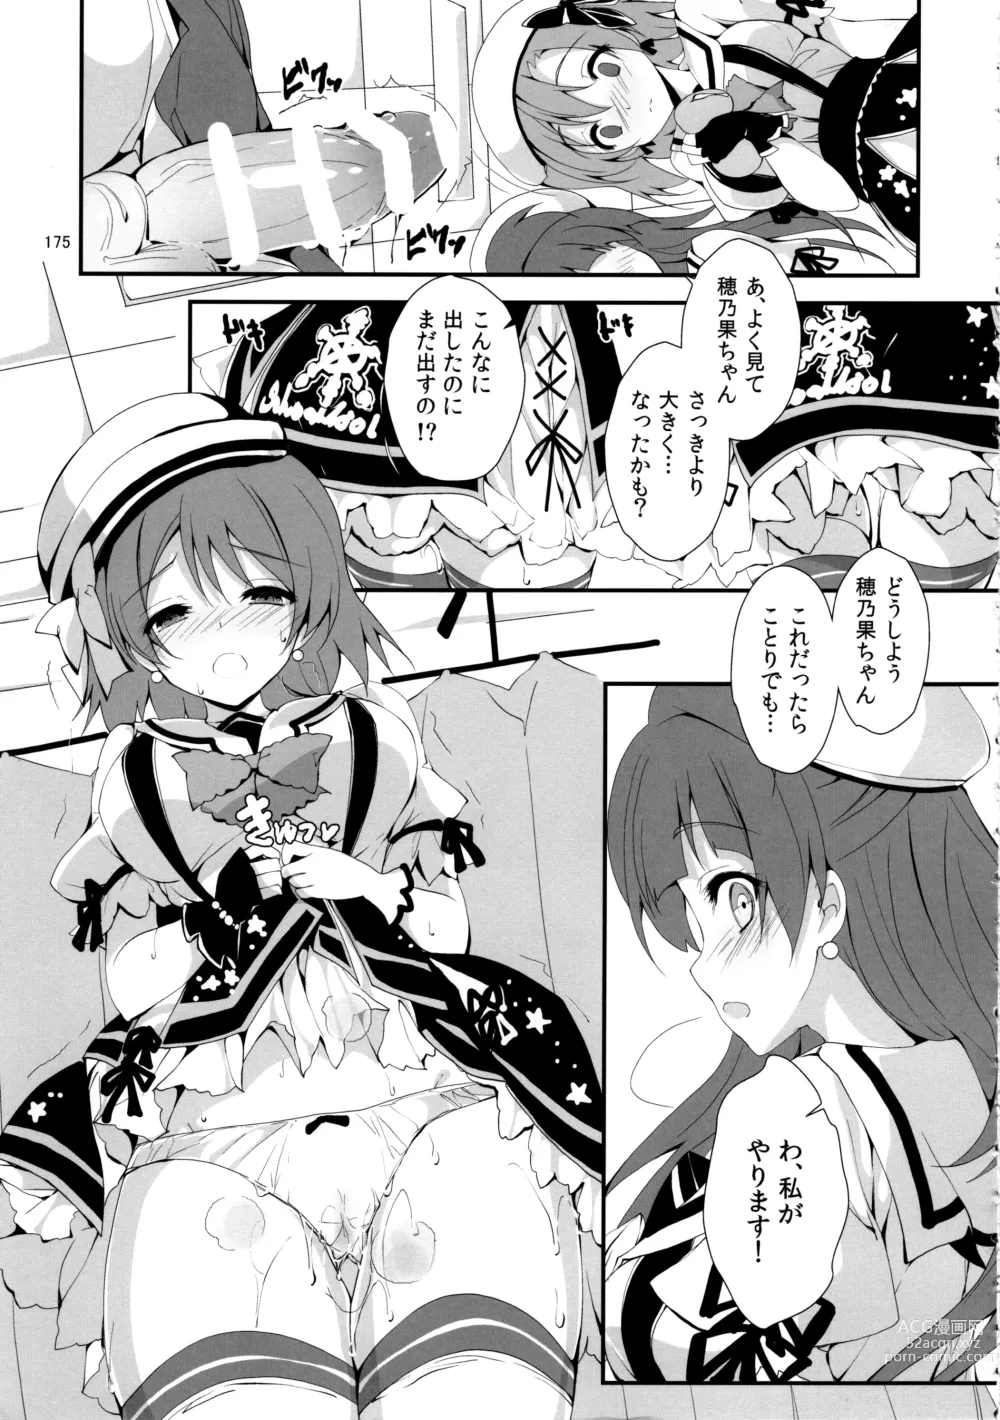 Page 178 of doujinshi Elo Live! collection IV